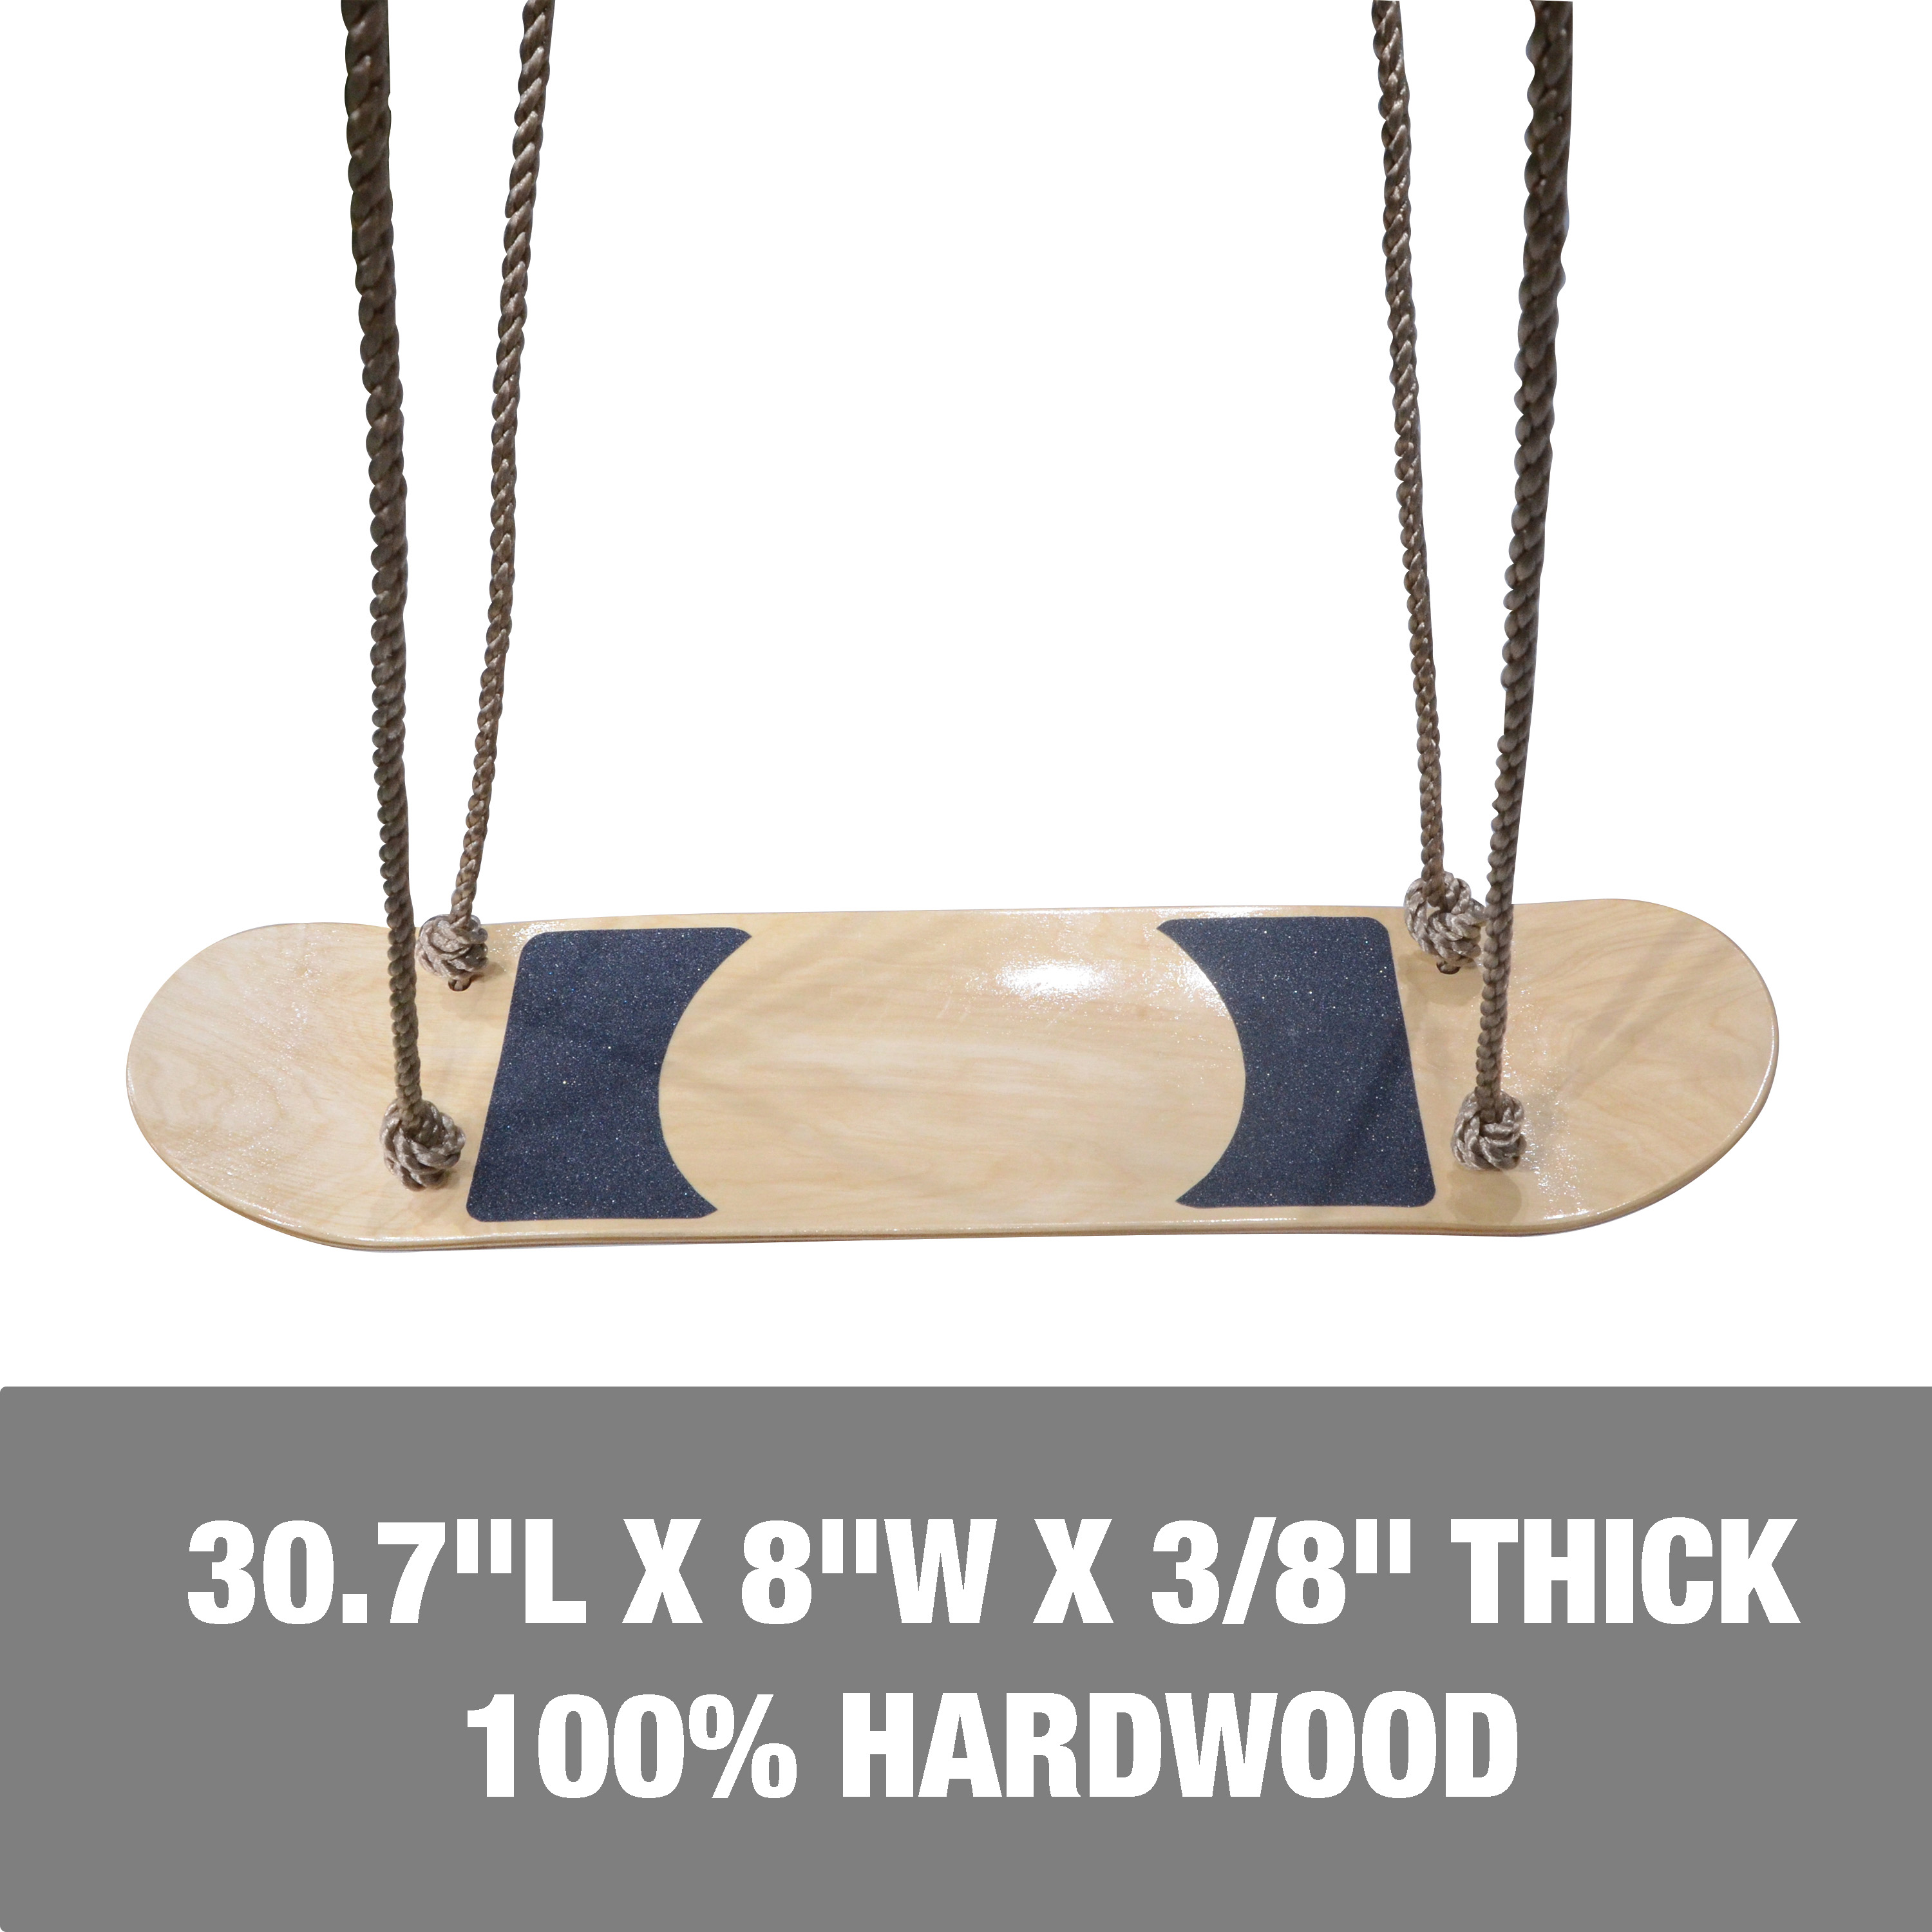 Bliss Outdoors Wooden Skateboard Swing W/ Handle Bars & Hanging Hardware, 200 lb. Capacity - image 3 of 7